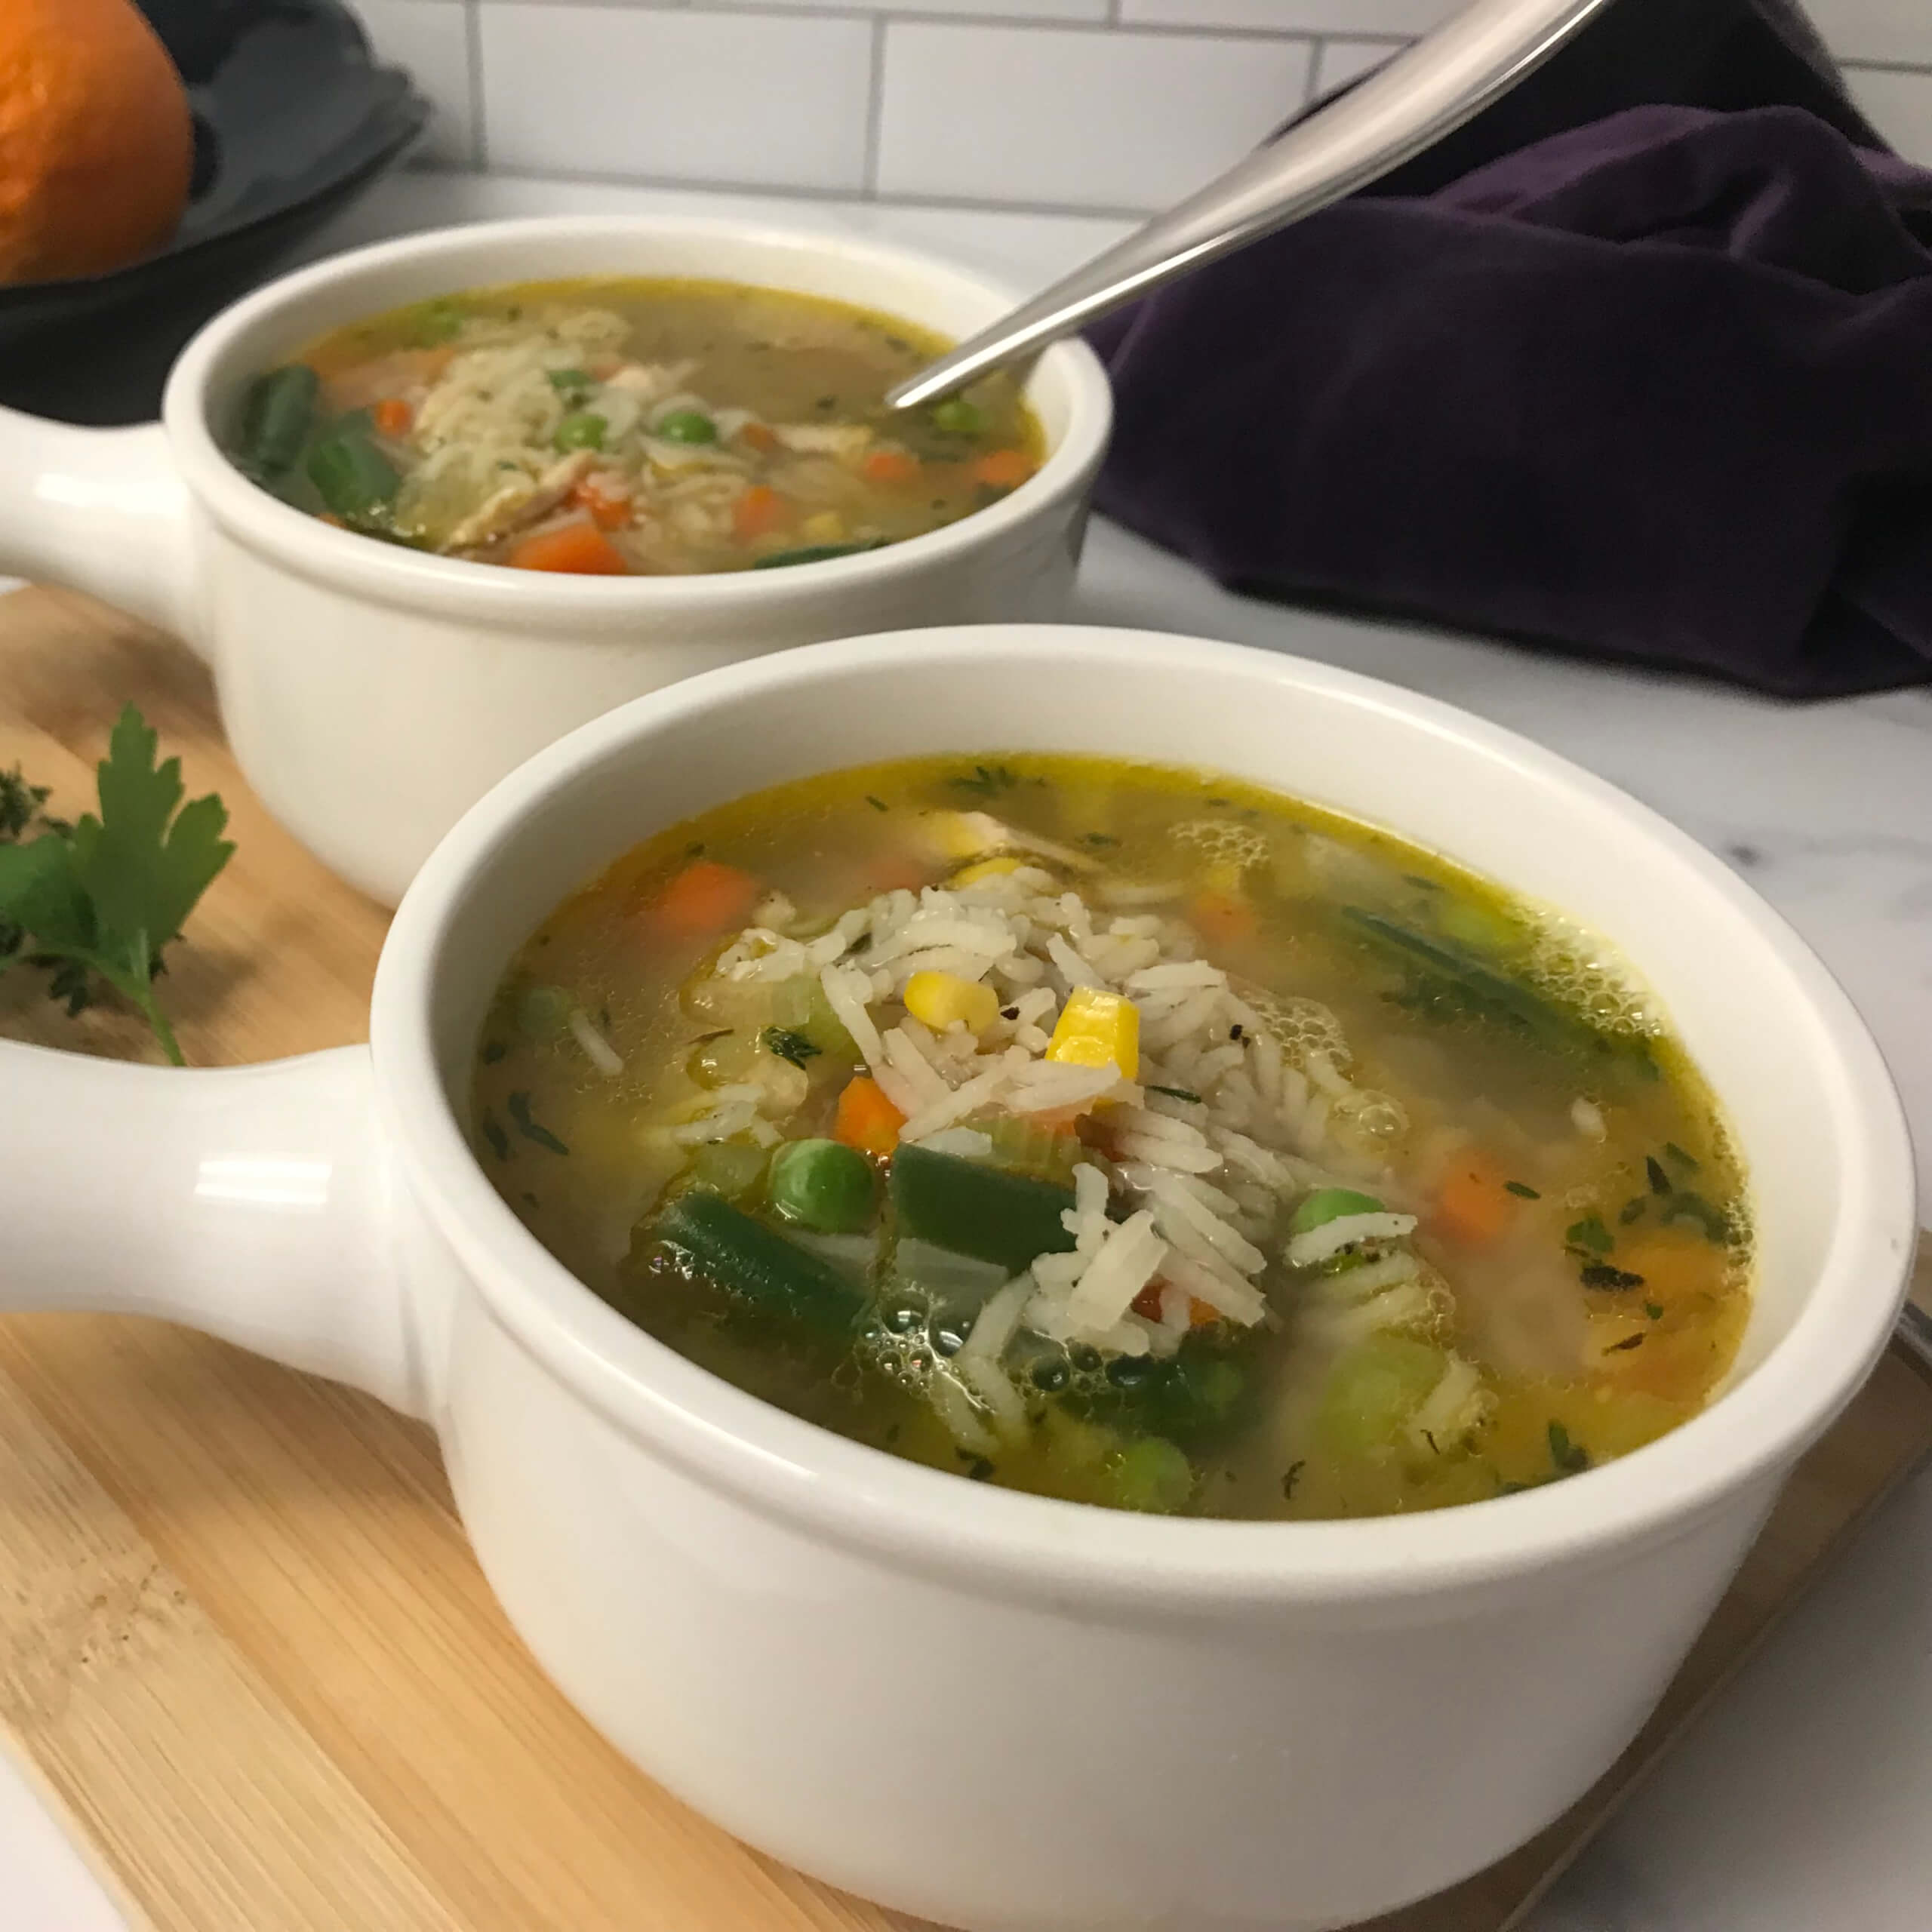 CHICKEN & RICE SOUP FOR TWO | My Curated Tastes